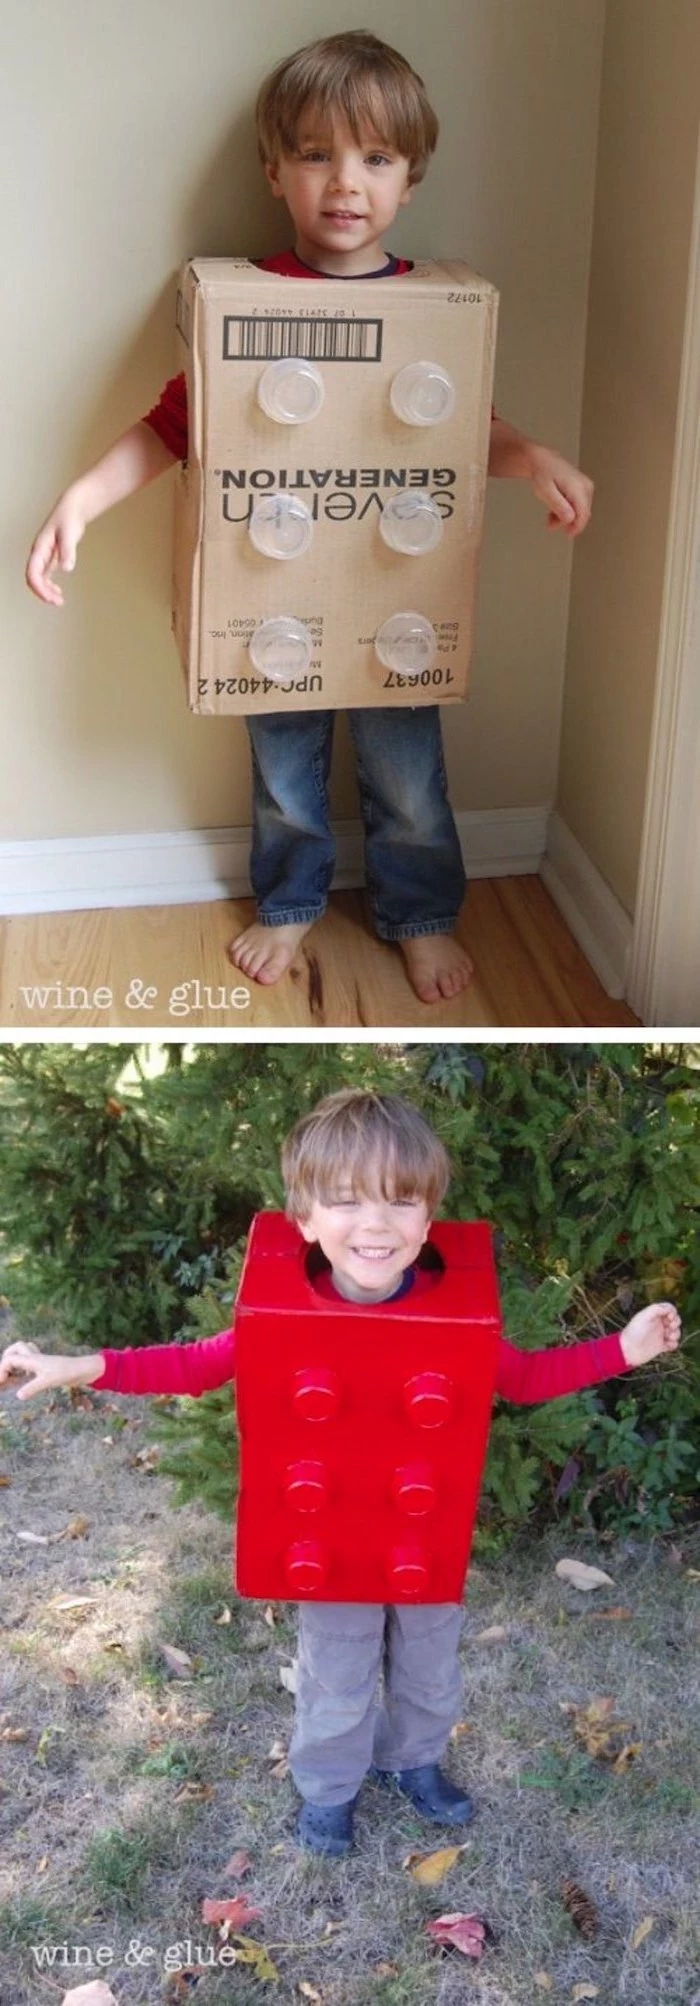 diy costume, superhero costumes for kids, little boy, dressed as a lego brick, painted in red, made of carton